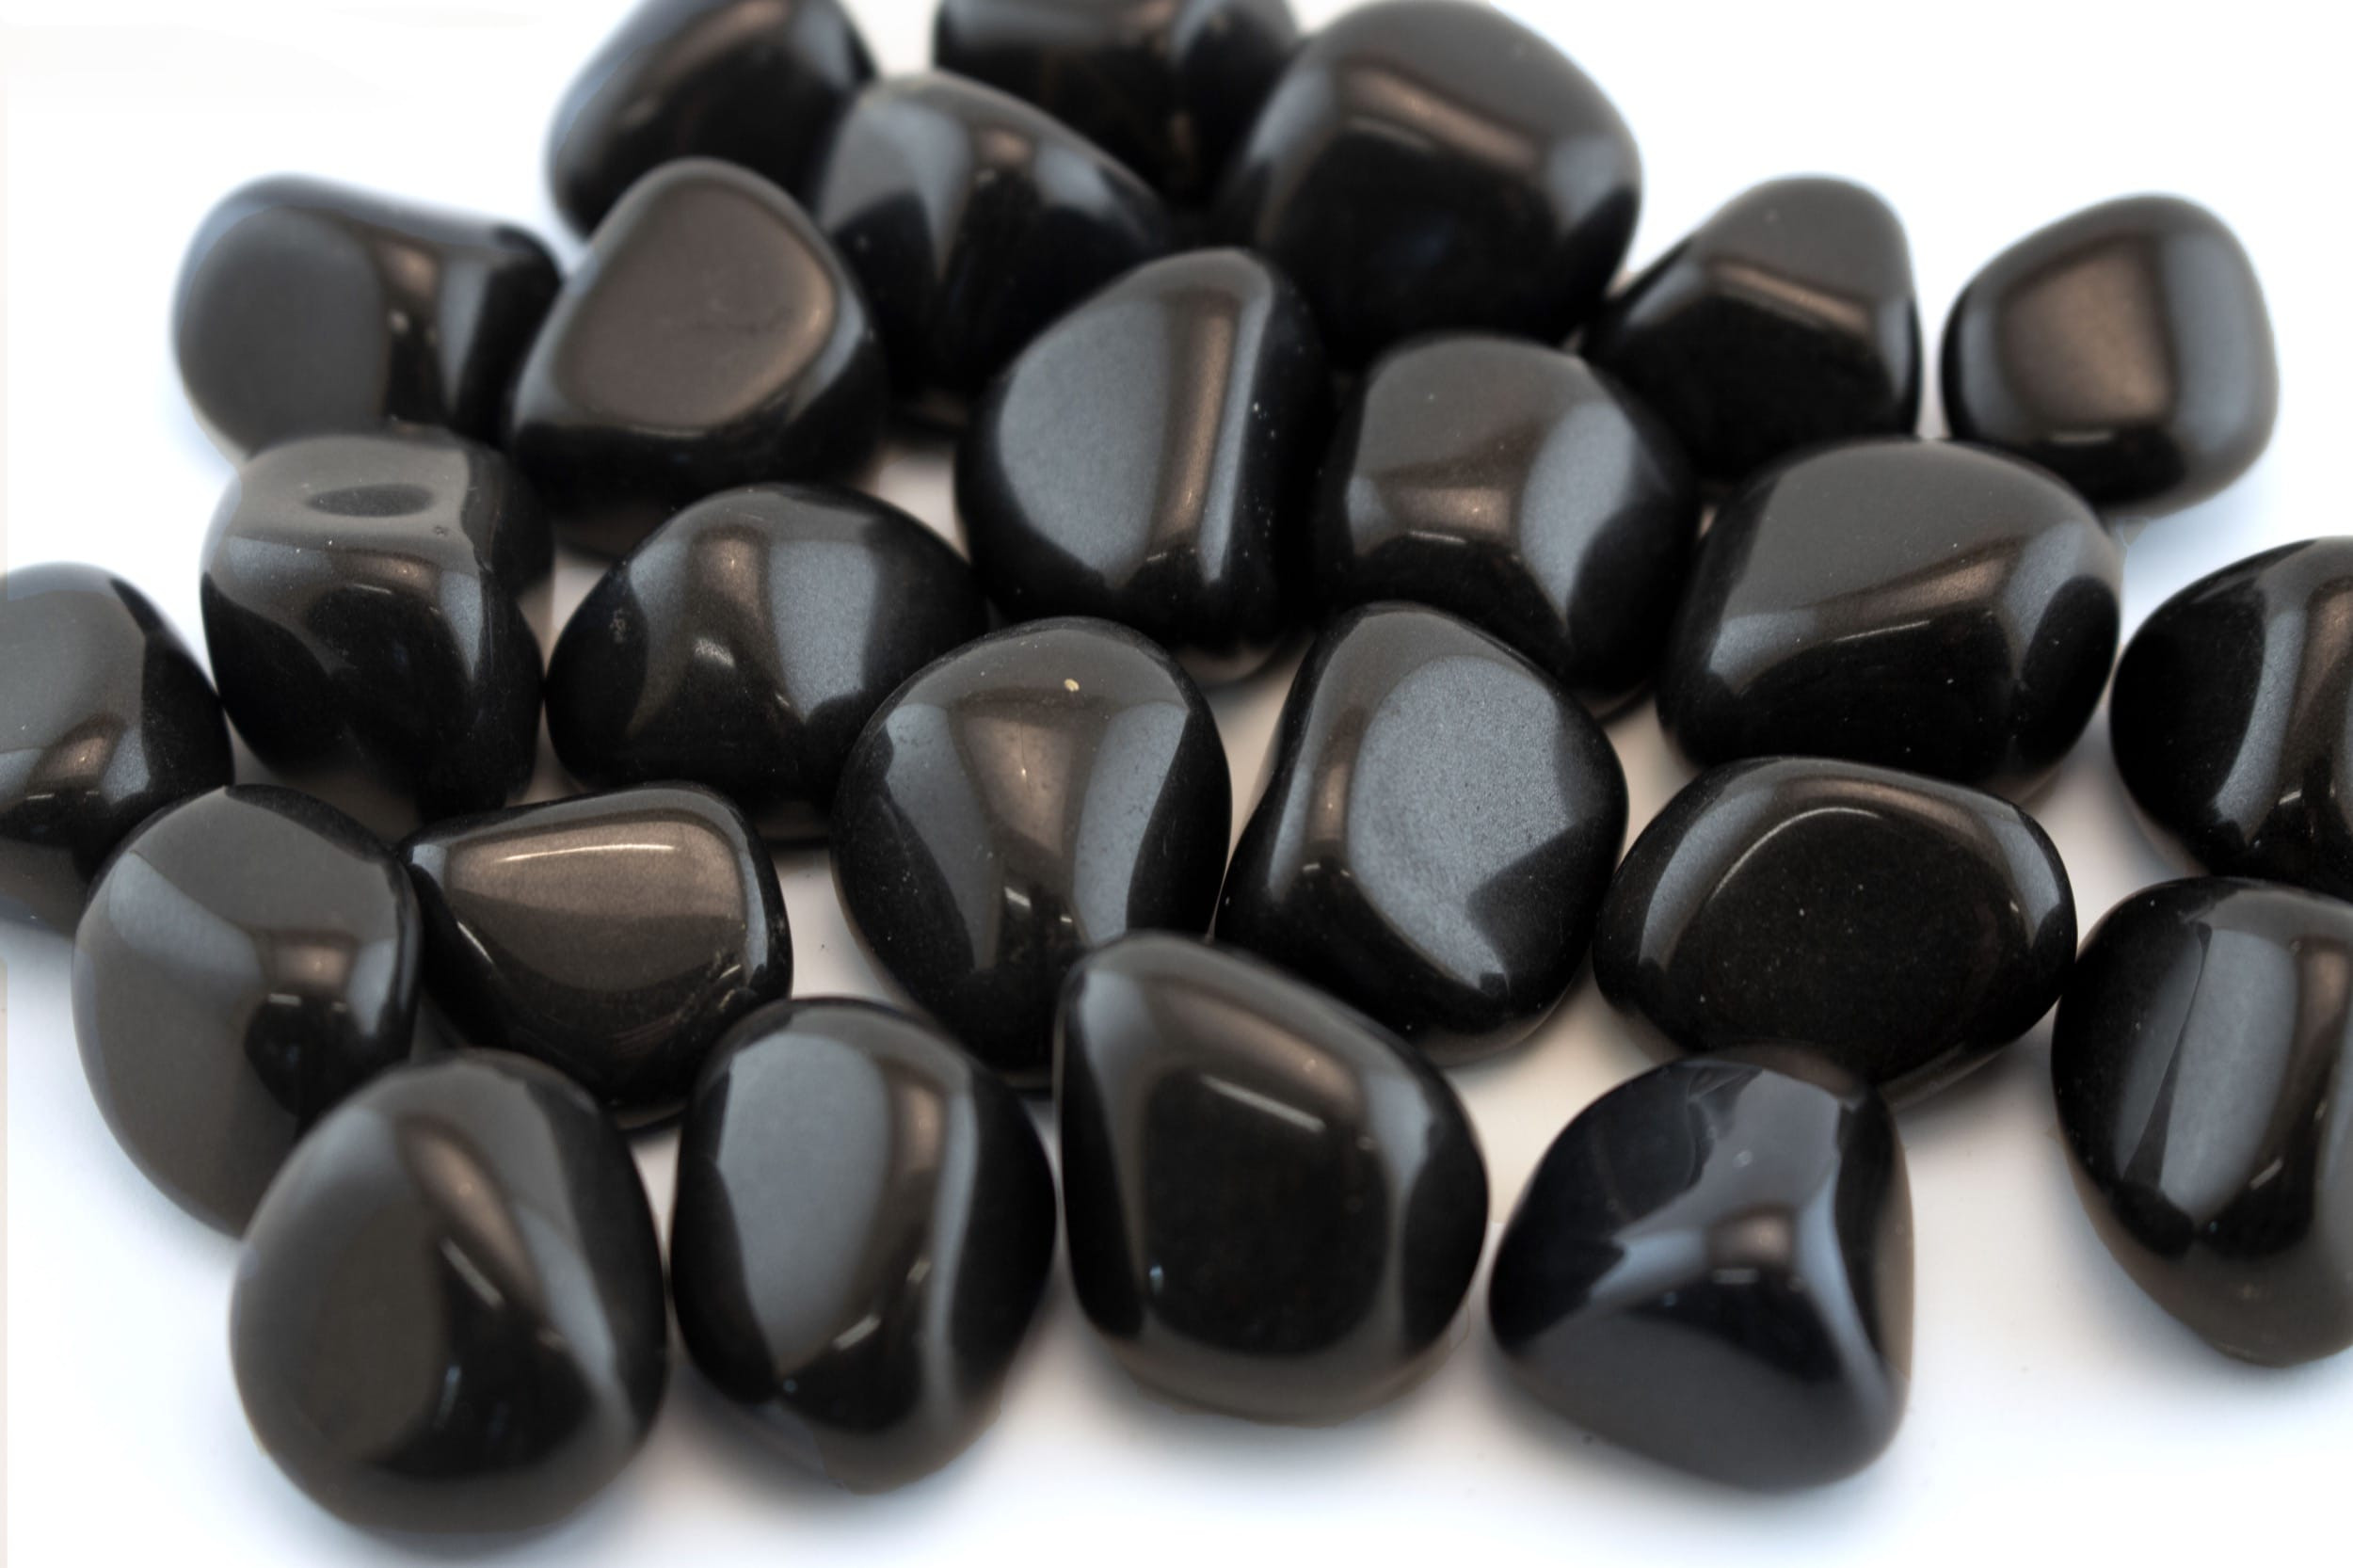 Onyx Spiritual Meaning - What Spiritual Properties Does It Have?